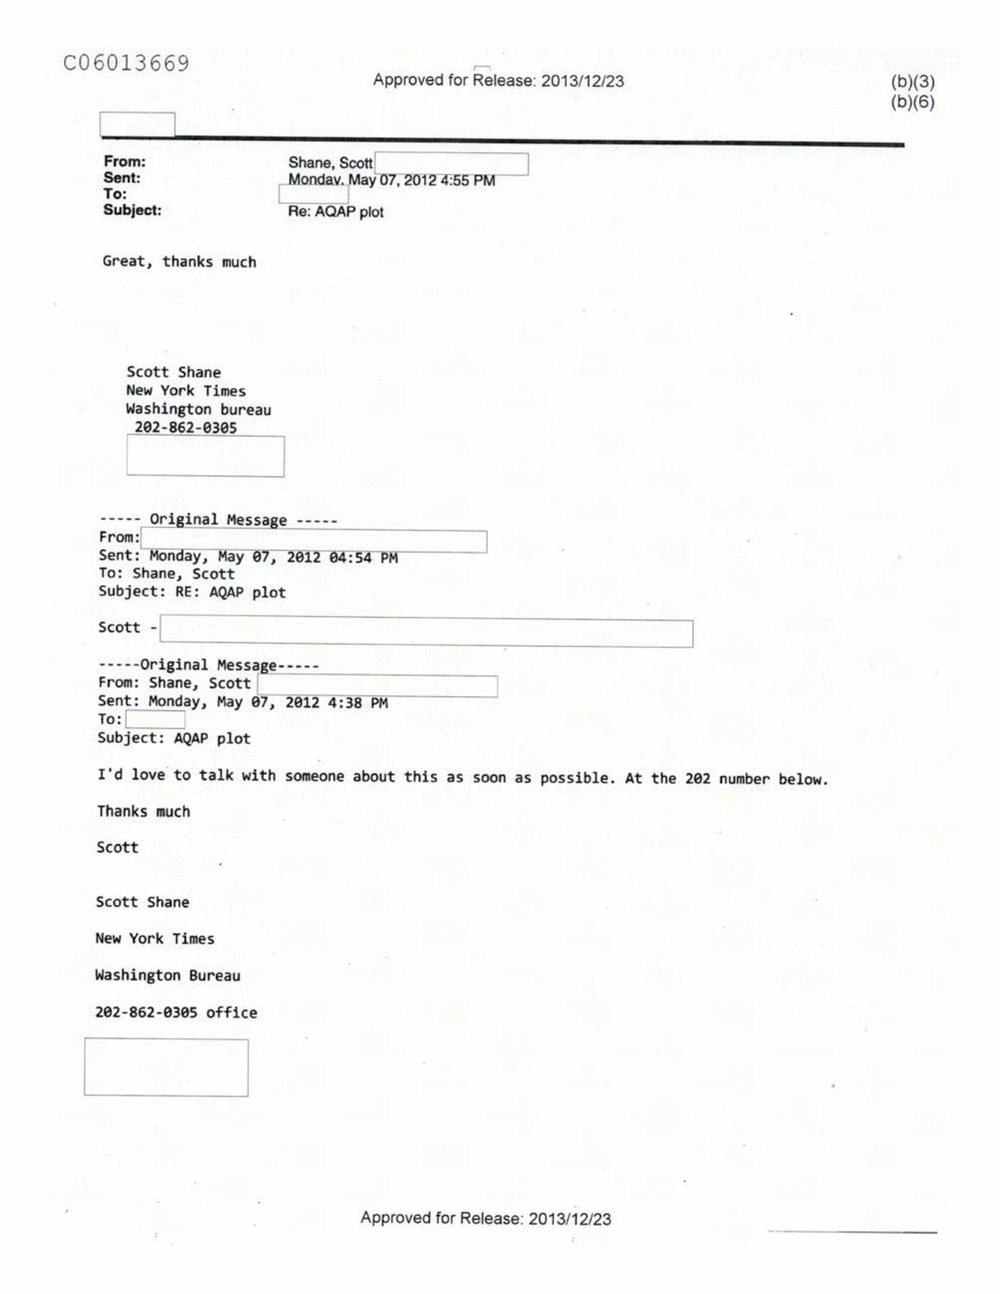 Page 517 from Email Correspondence Between Reporters and CIA Flacks